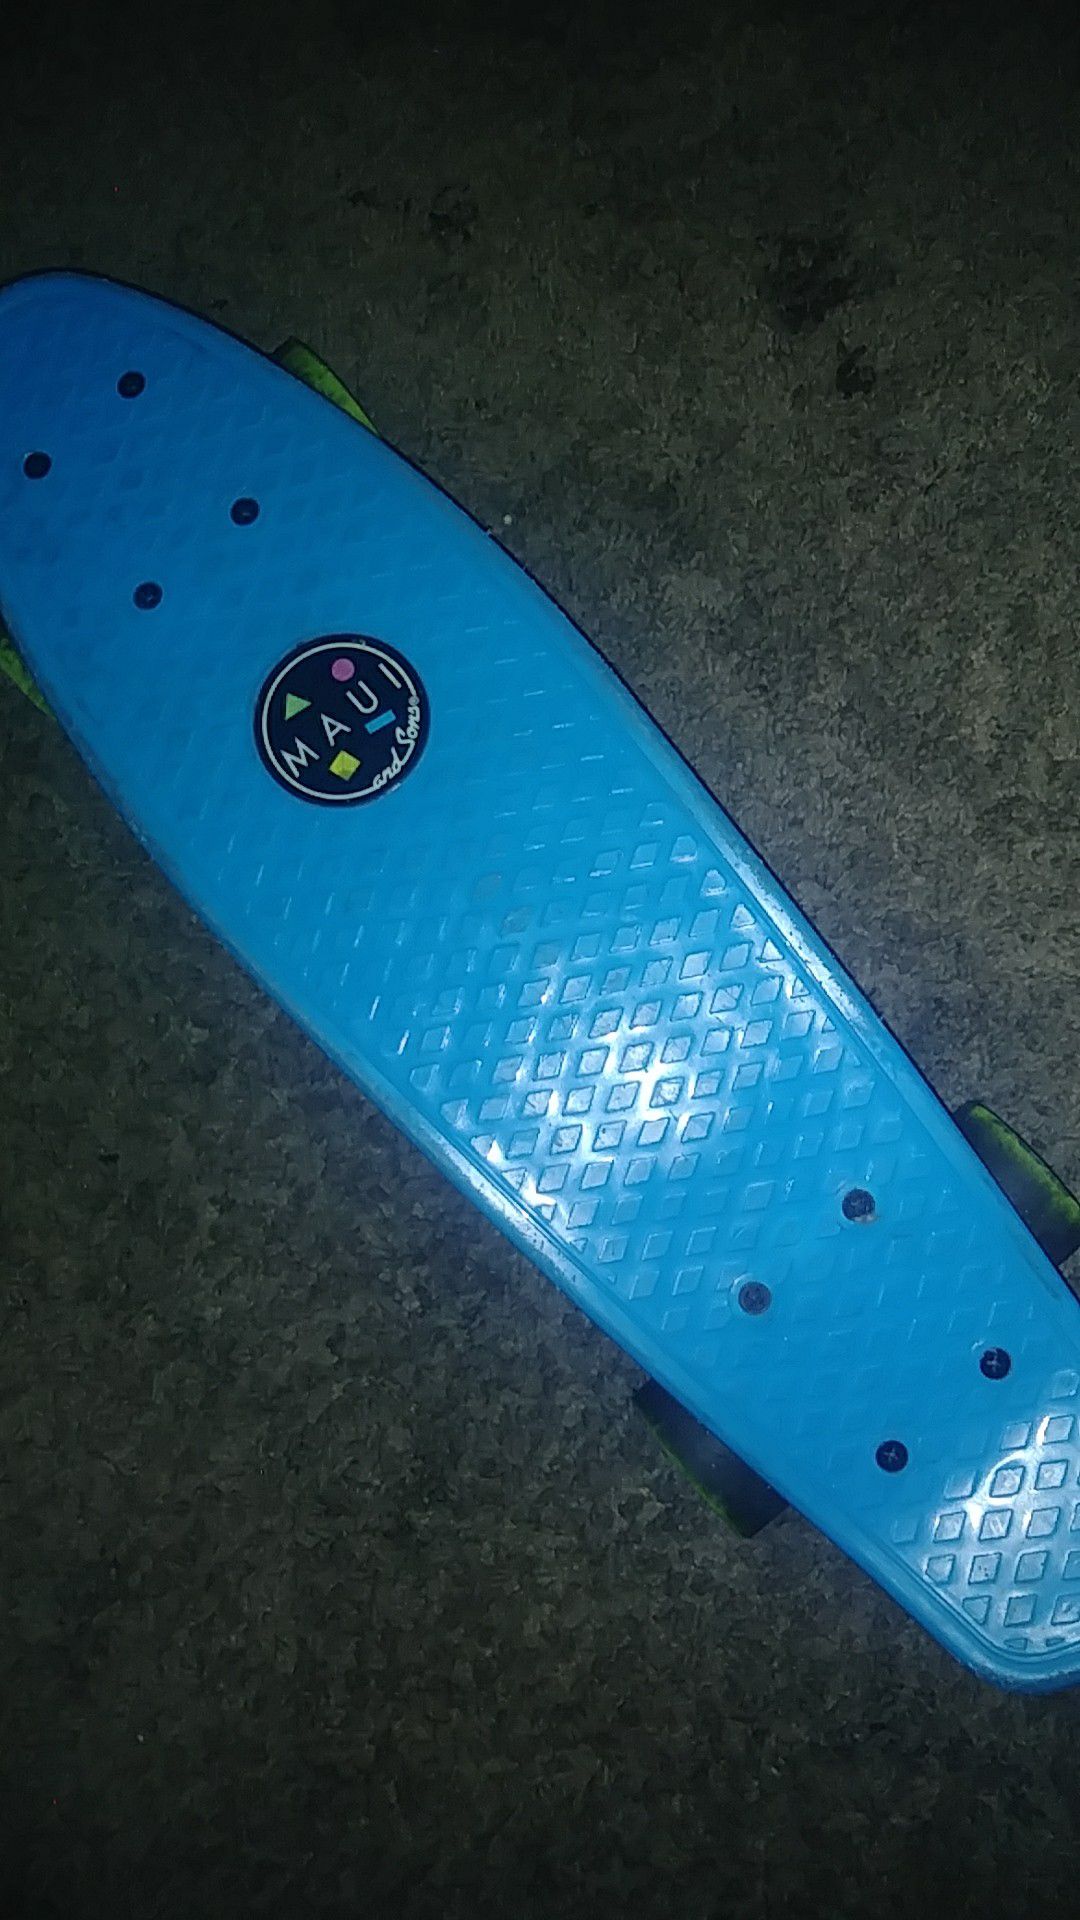 Maui and Sons Pennyboard